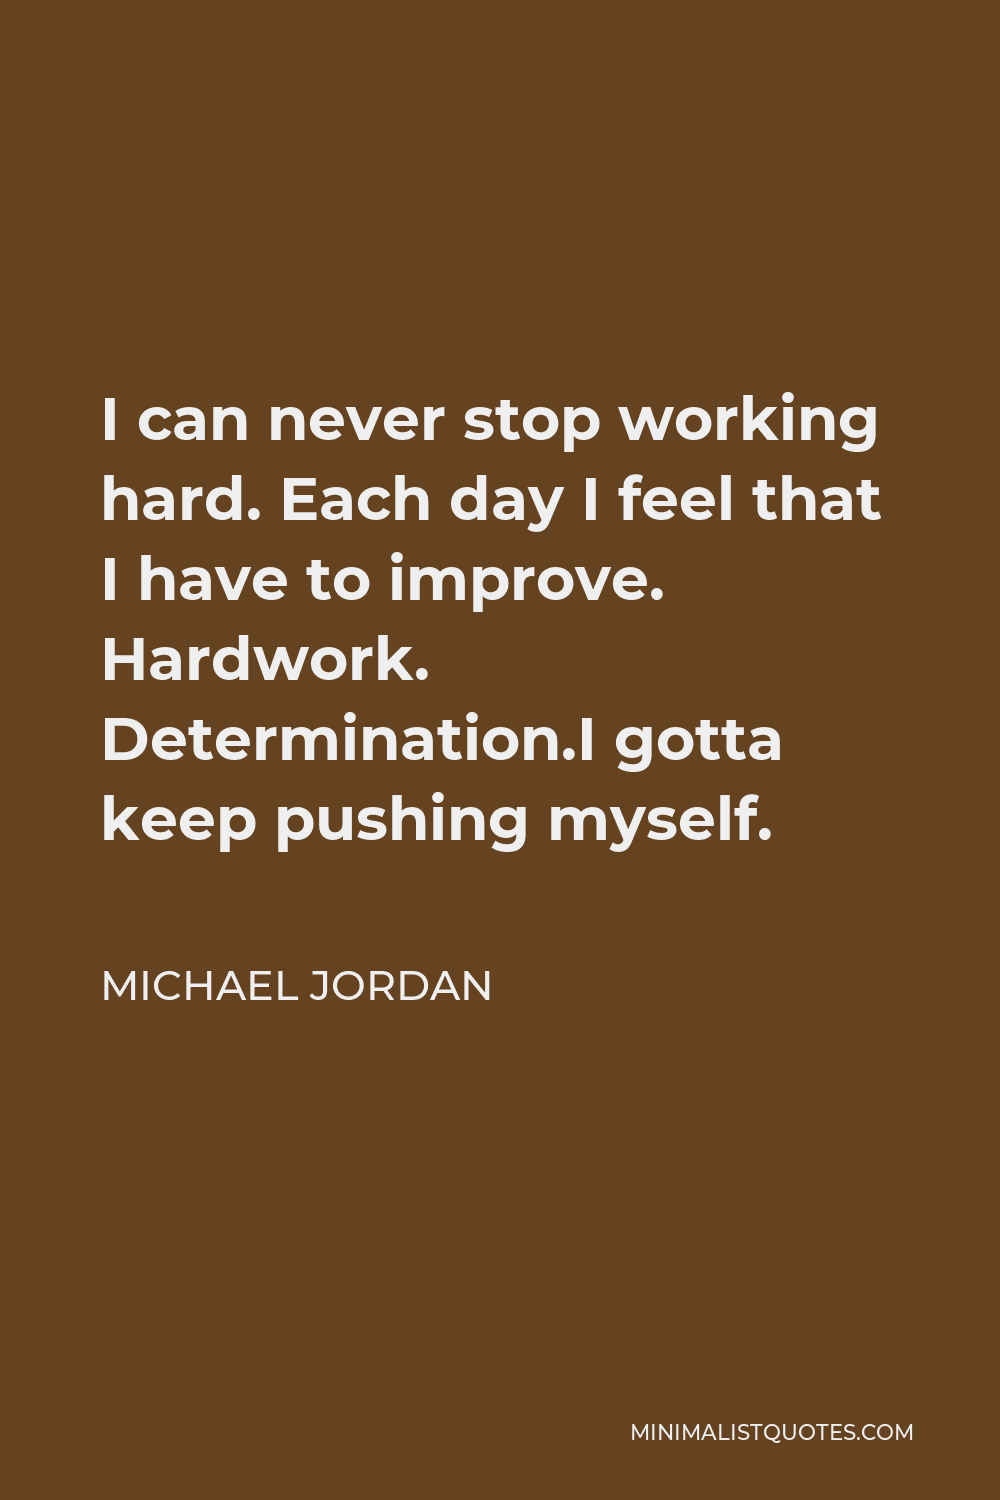 Michael Jordan Quote - I can never stop working hard. Each day I feel that I have to improve. Hardwork. Determination.I gotta keep pushing myself.